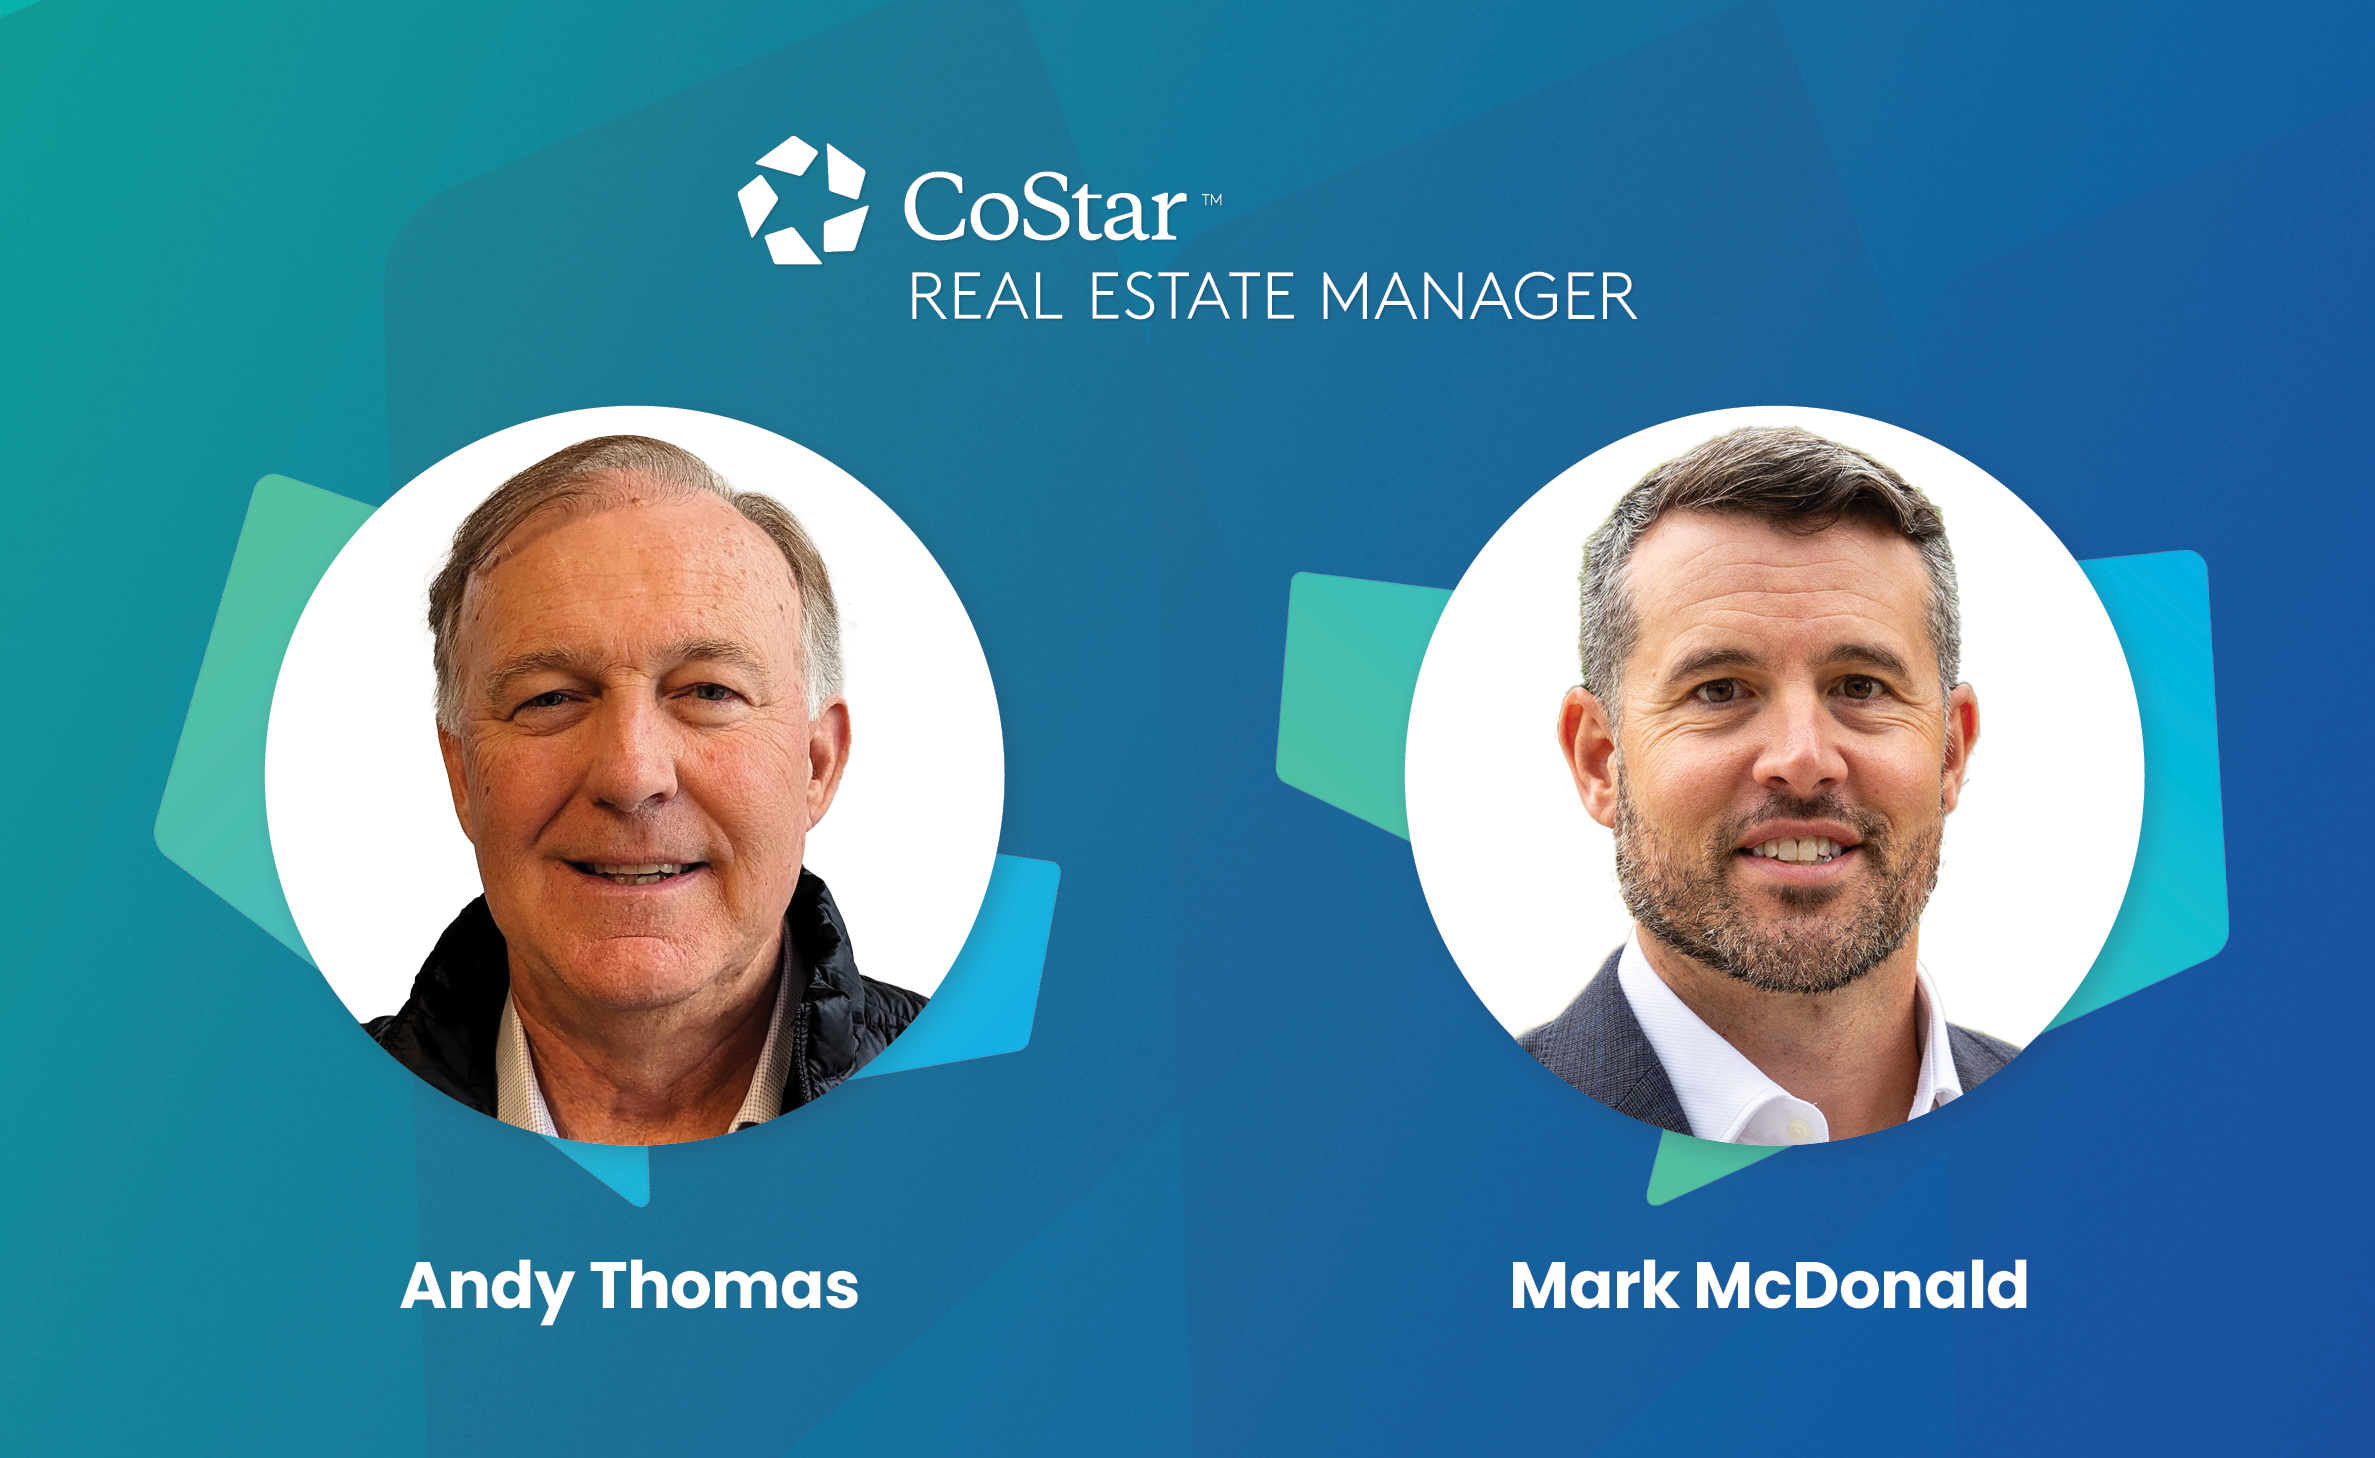 Headshots of Andy Thomas and Mark McDonald with the CoStar Real Estate Manager logo